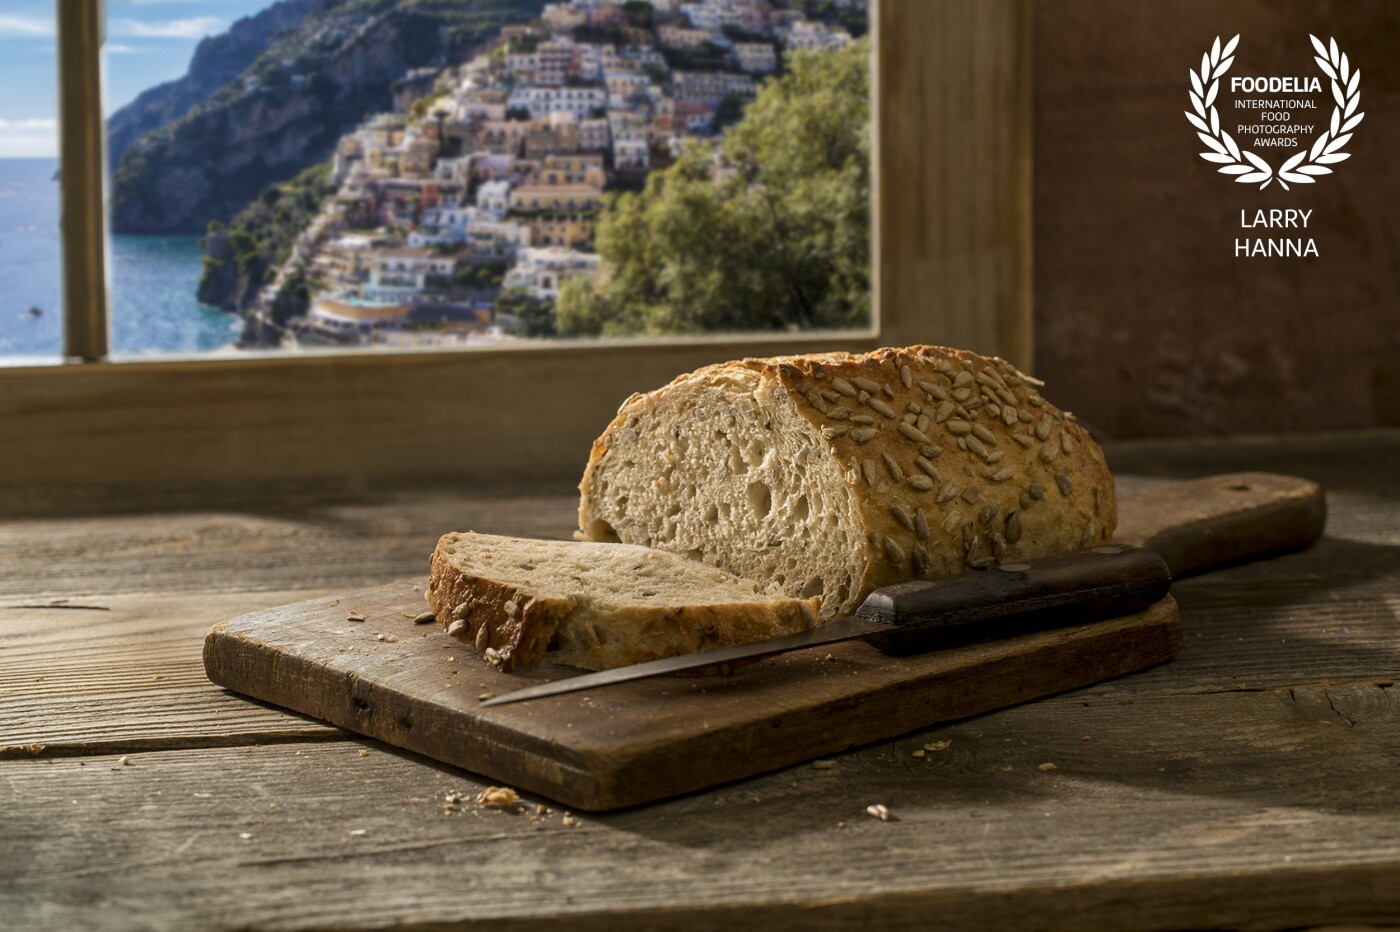 I photographed this loaf of bread for my portfolio.  Photographed using natural light in my kitchen with a set I constructed.  The window image was added from a photograph I took in Positano last year.